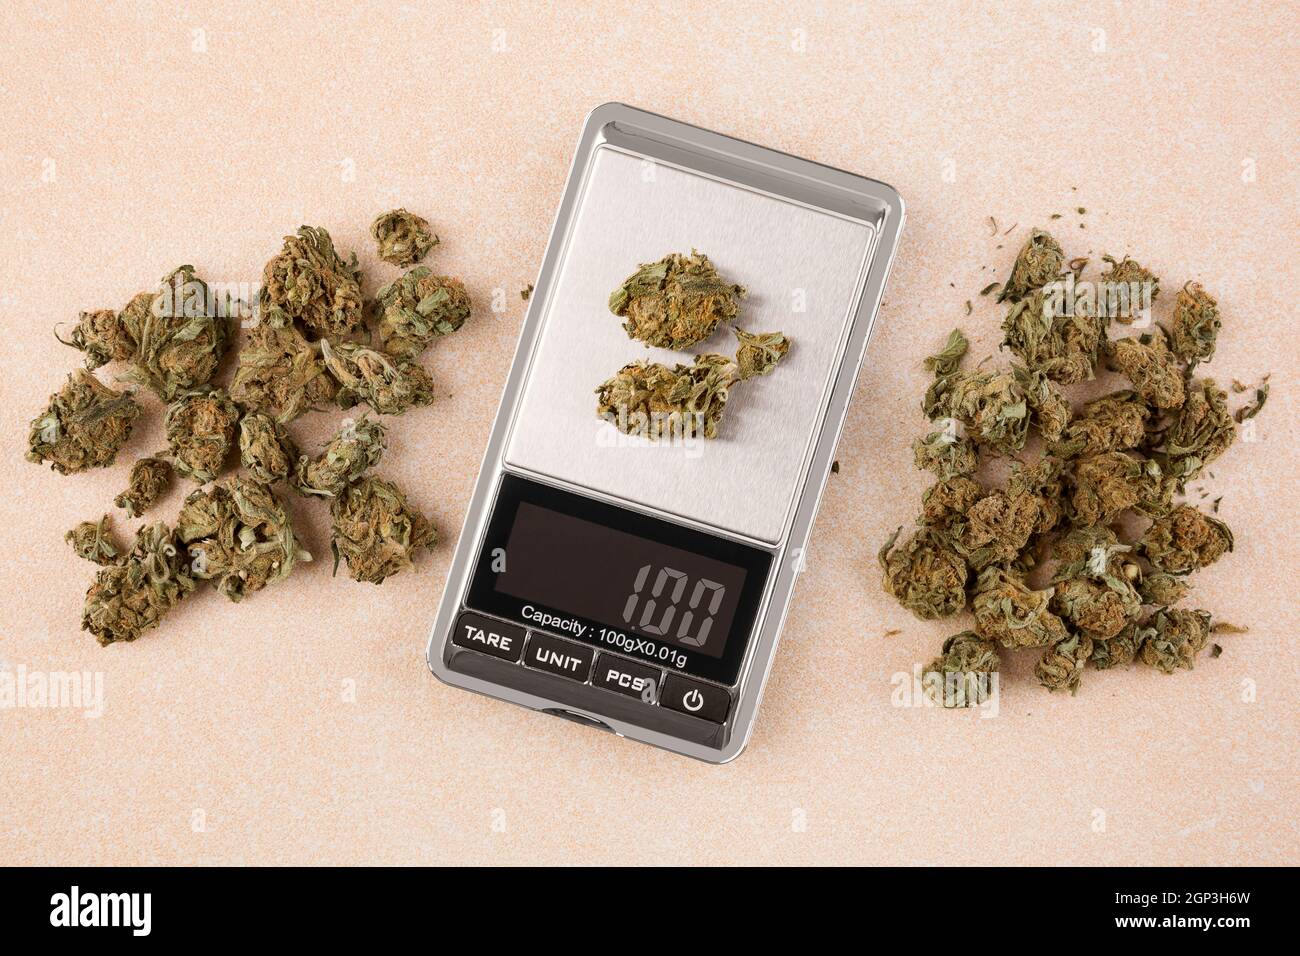 Cannabis buds on digital scale top view Stock Photo - Alamy